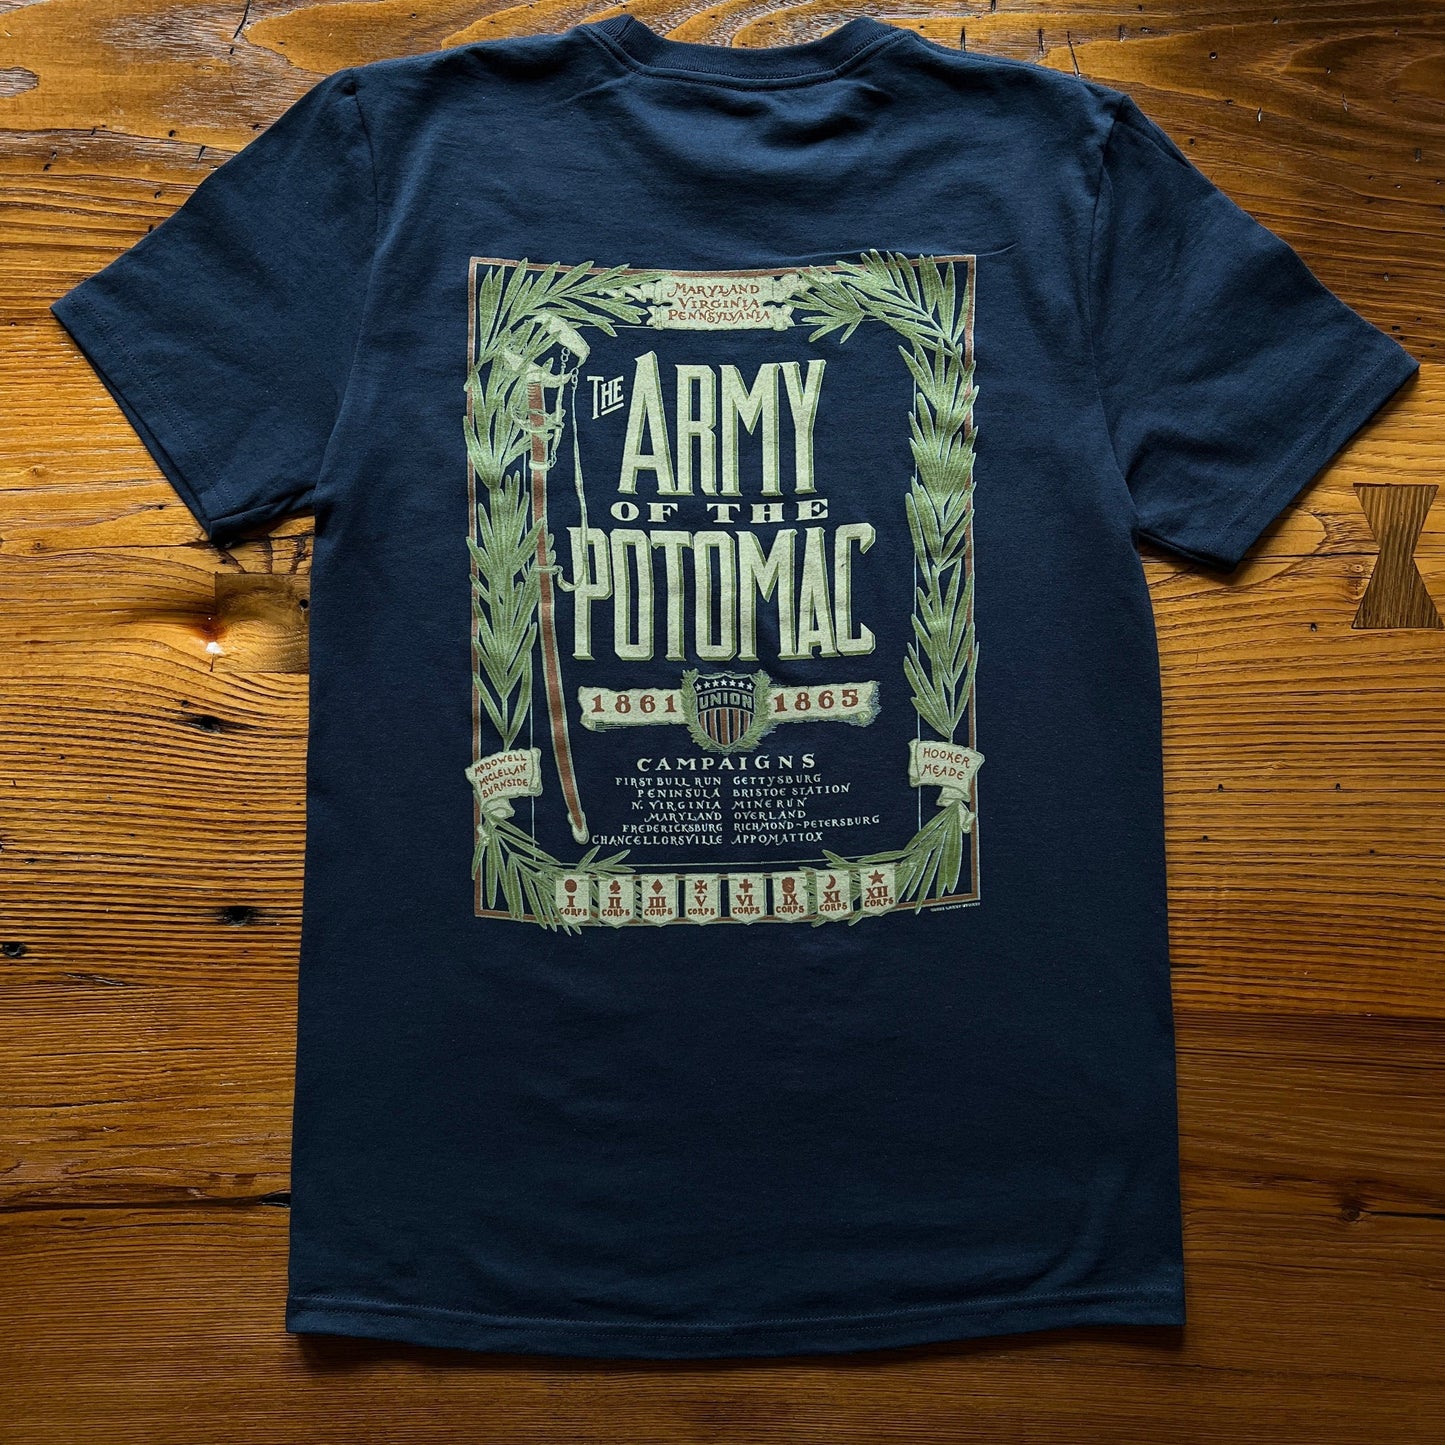 Back of "The Army of the Potomac" Shirt from The History List store